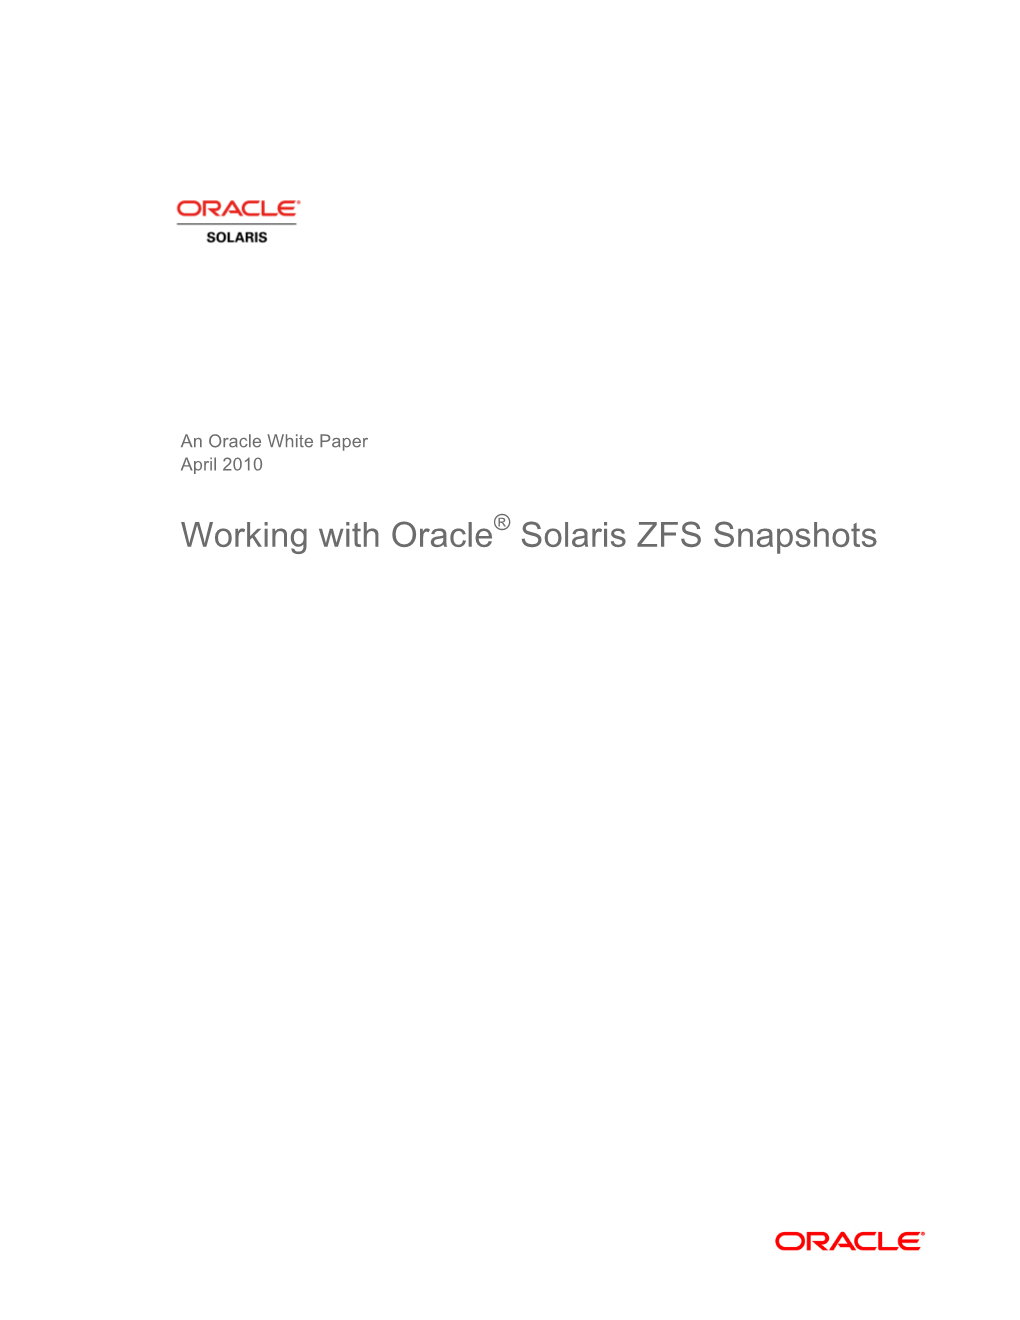 Working with Oracle® Solaris ZFS Snapshots